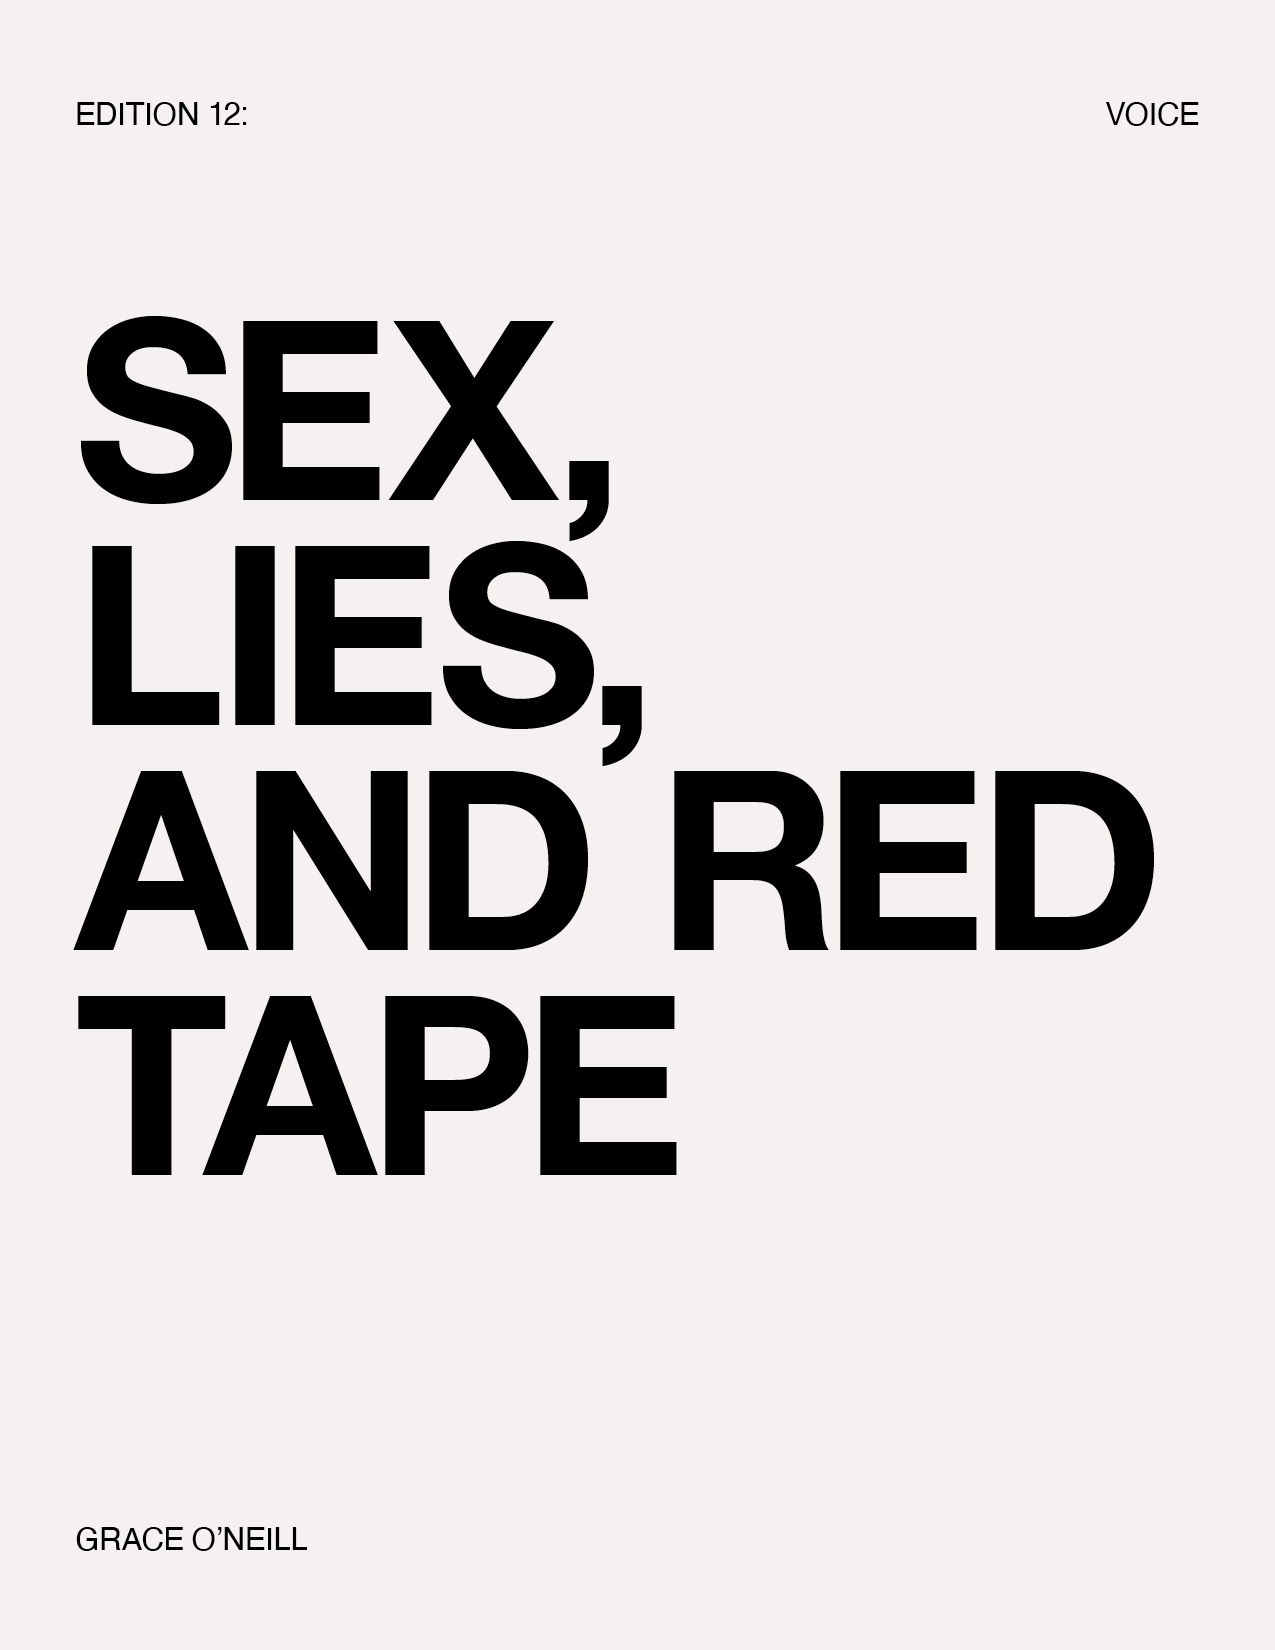 Red Tape Porn - SEX, LIES, AND RED TAPE BY GRACE O'NEILL - SIDE-NOTE